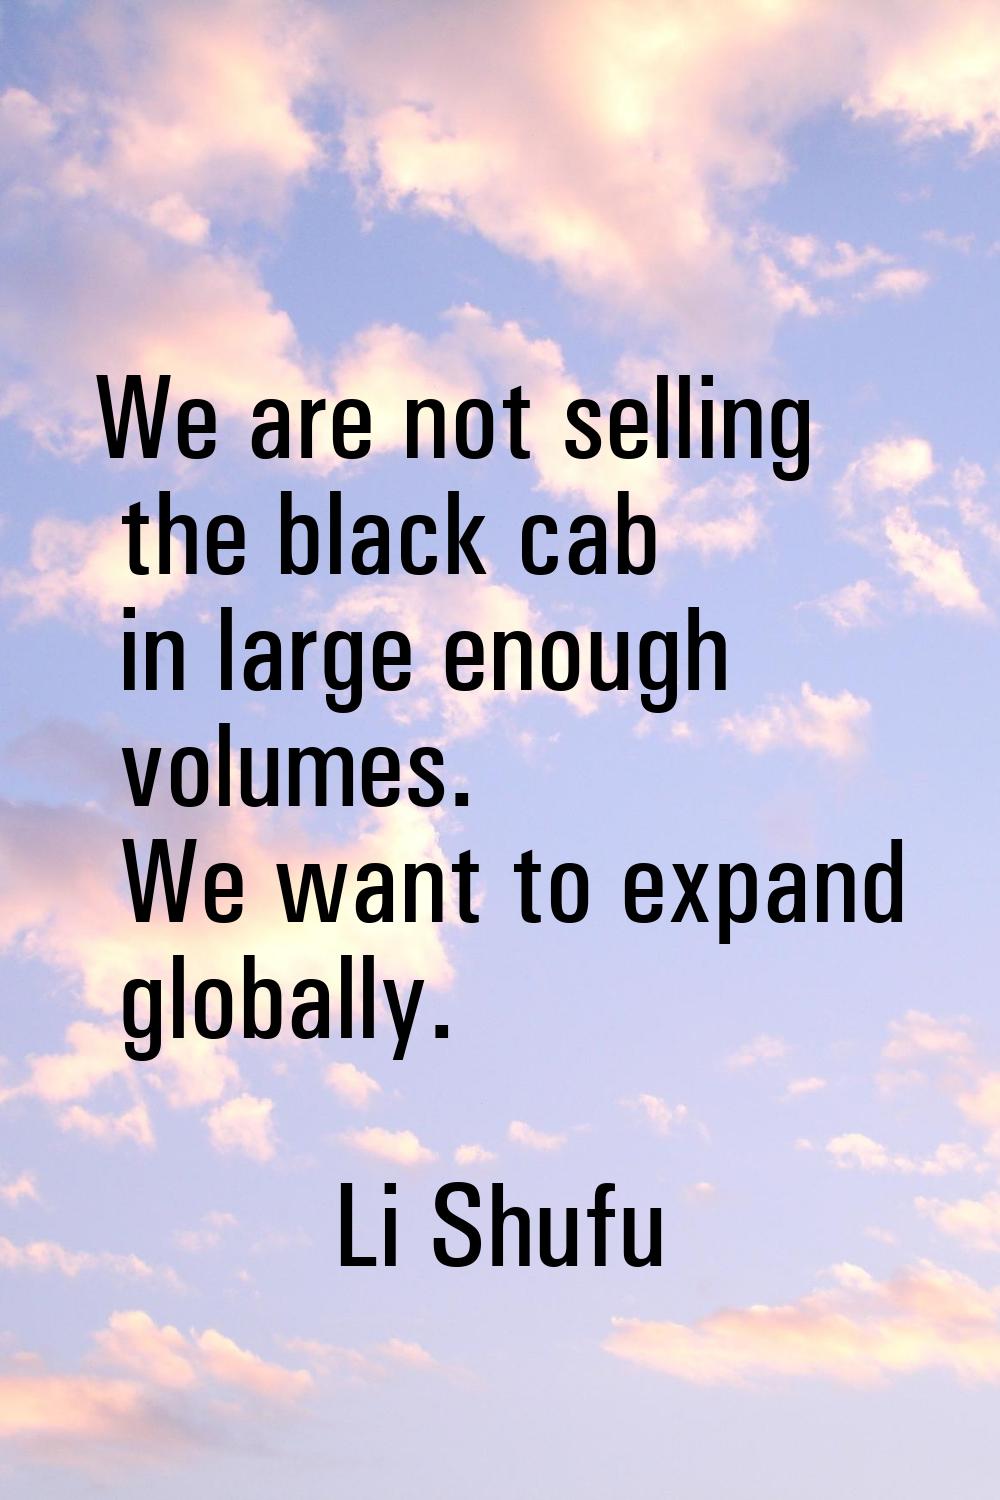 We are not selling the black cab in large enough volumes. We want to expand globally.